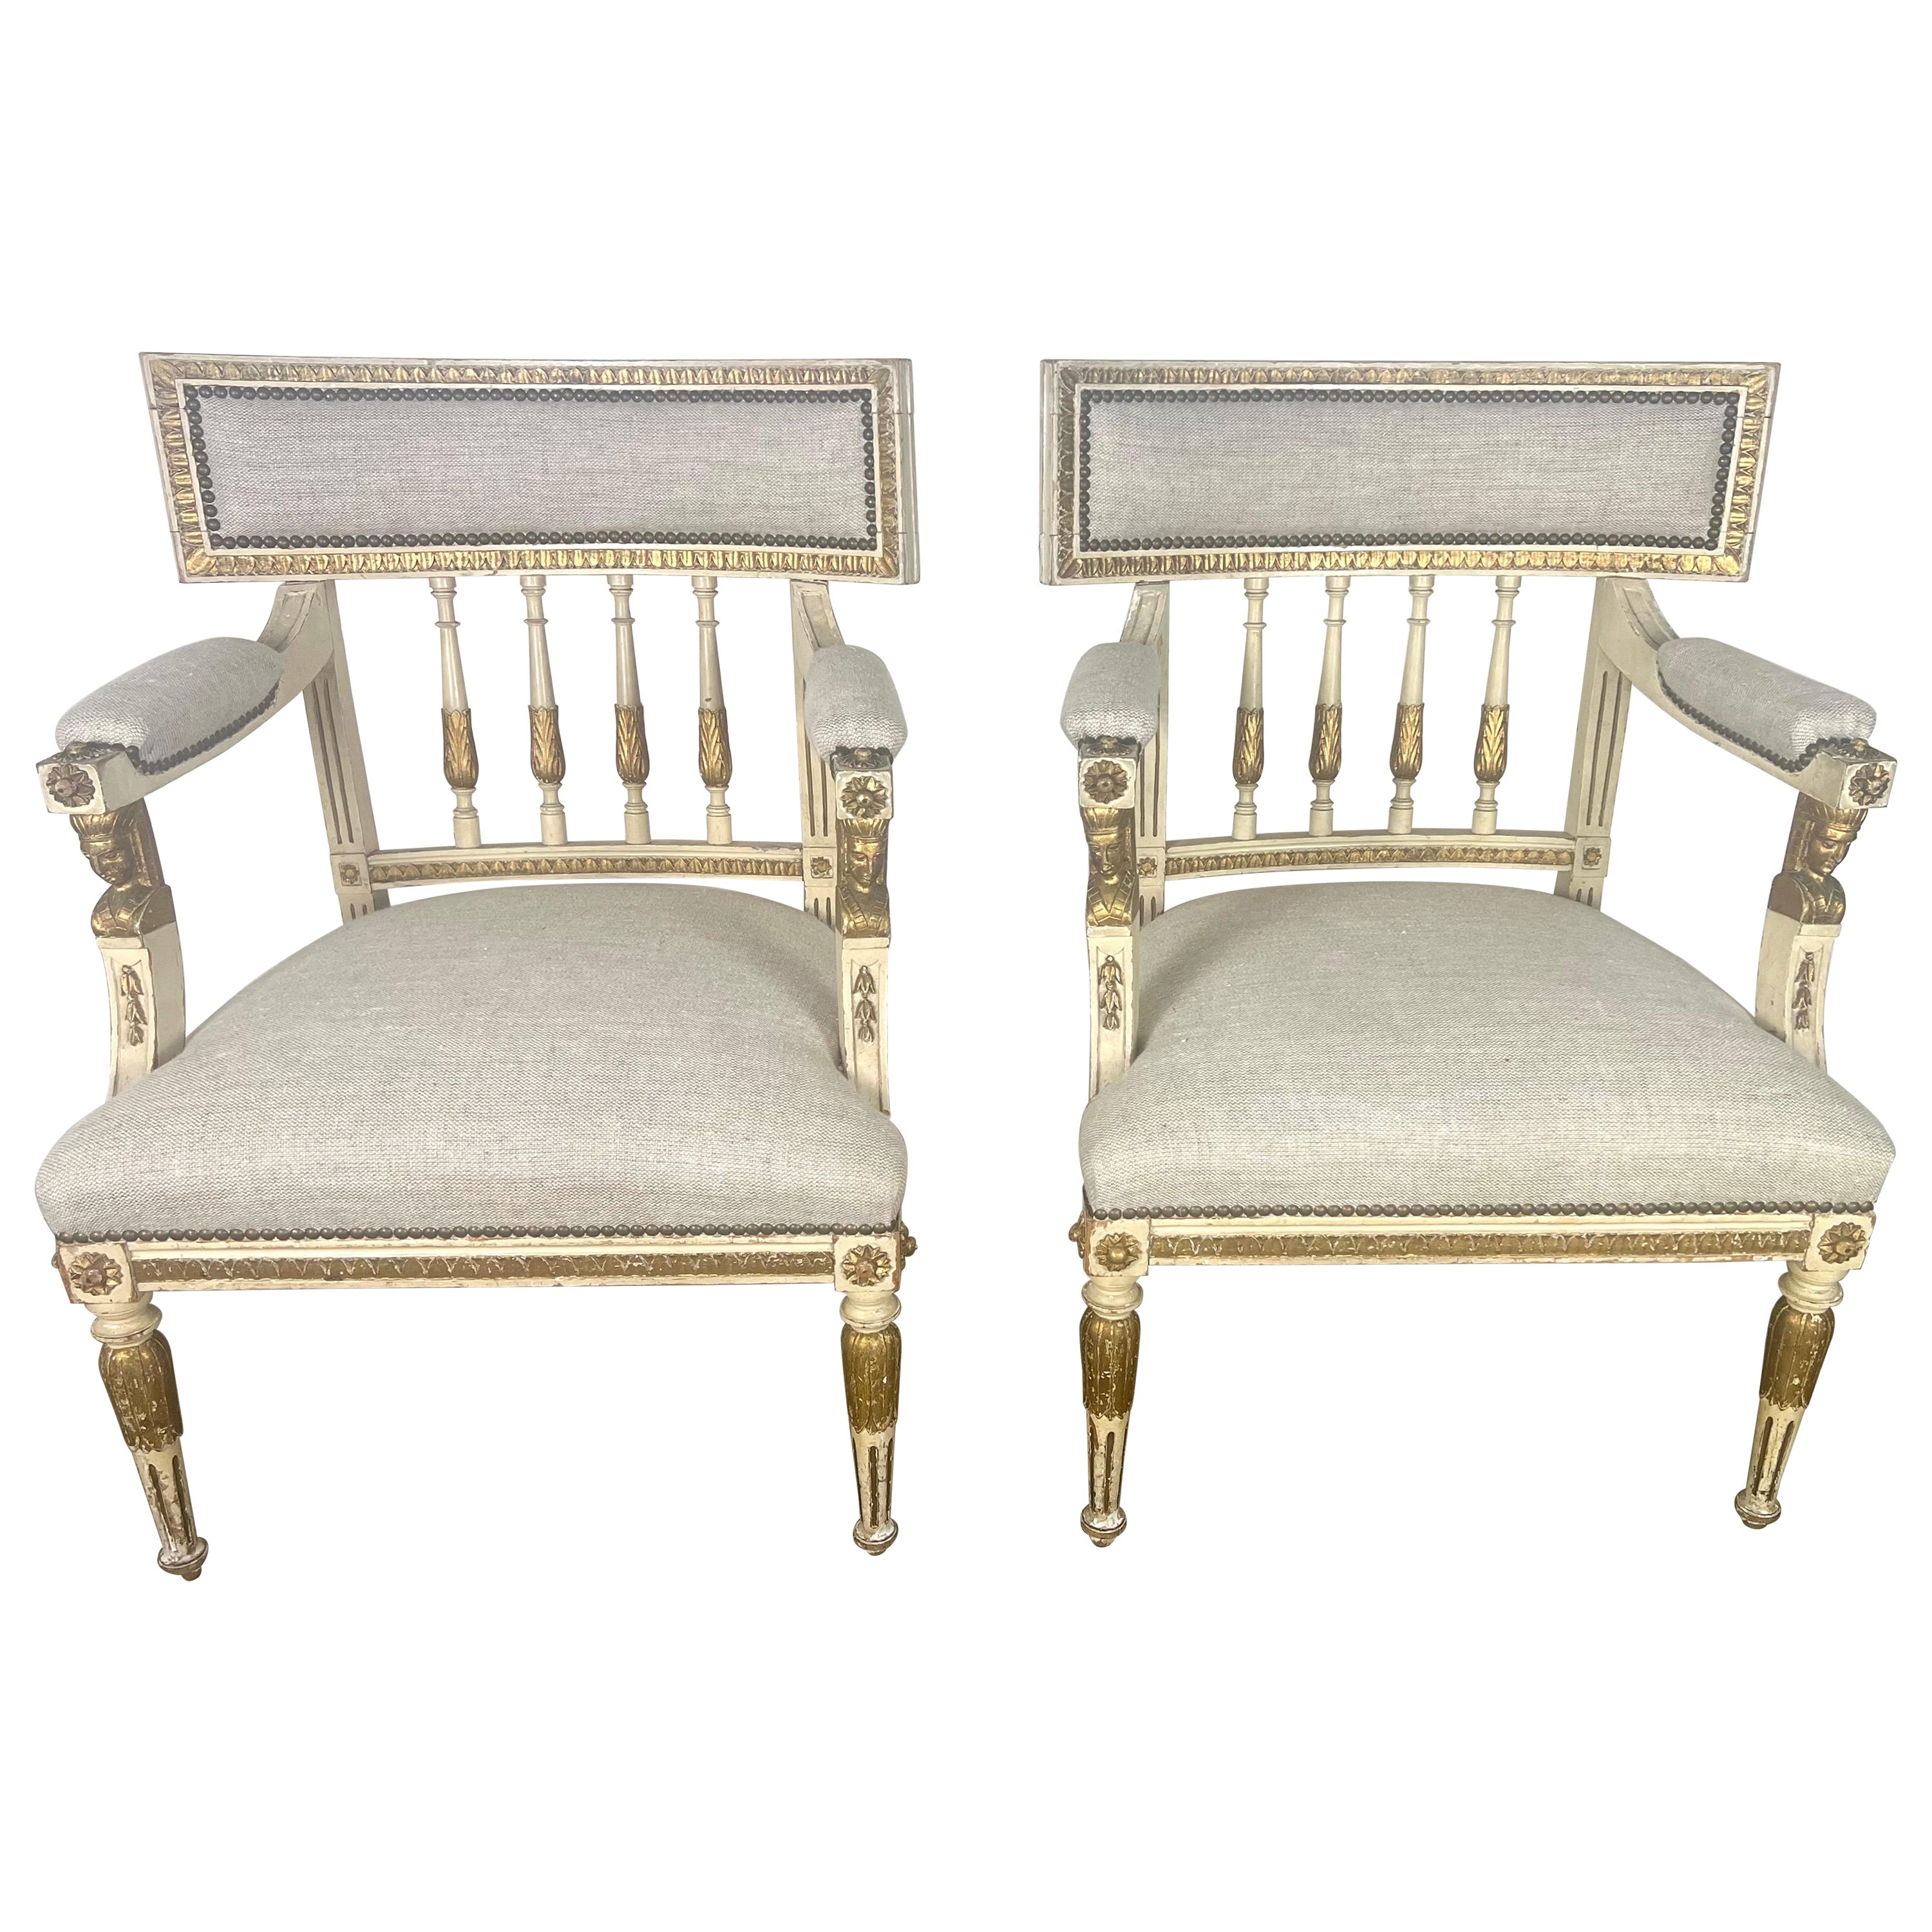 Pair of Italian Neoclassical Style Painted & Parcel Gilt Armchairs C. 1900's